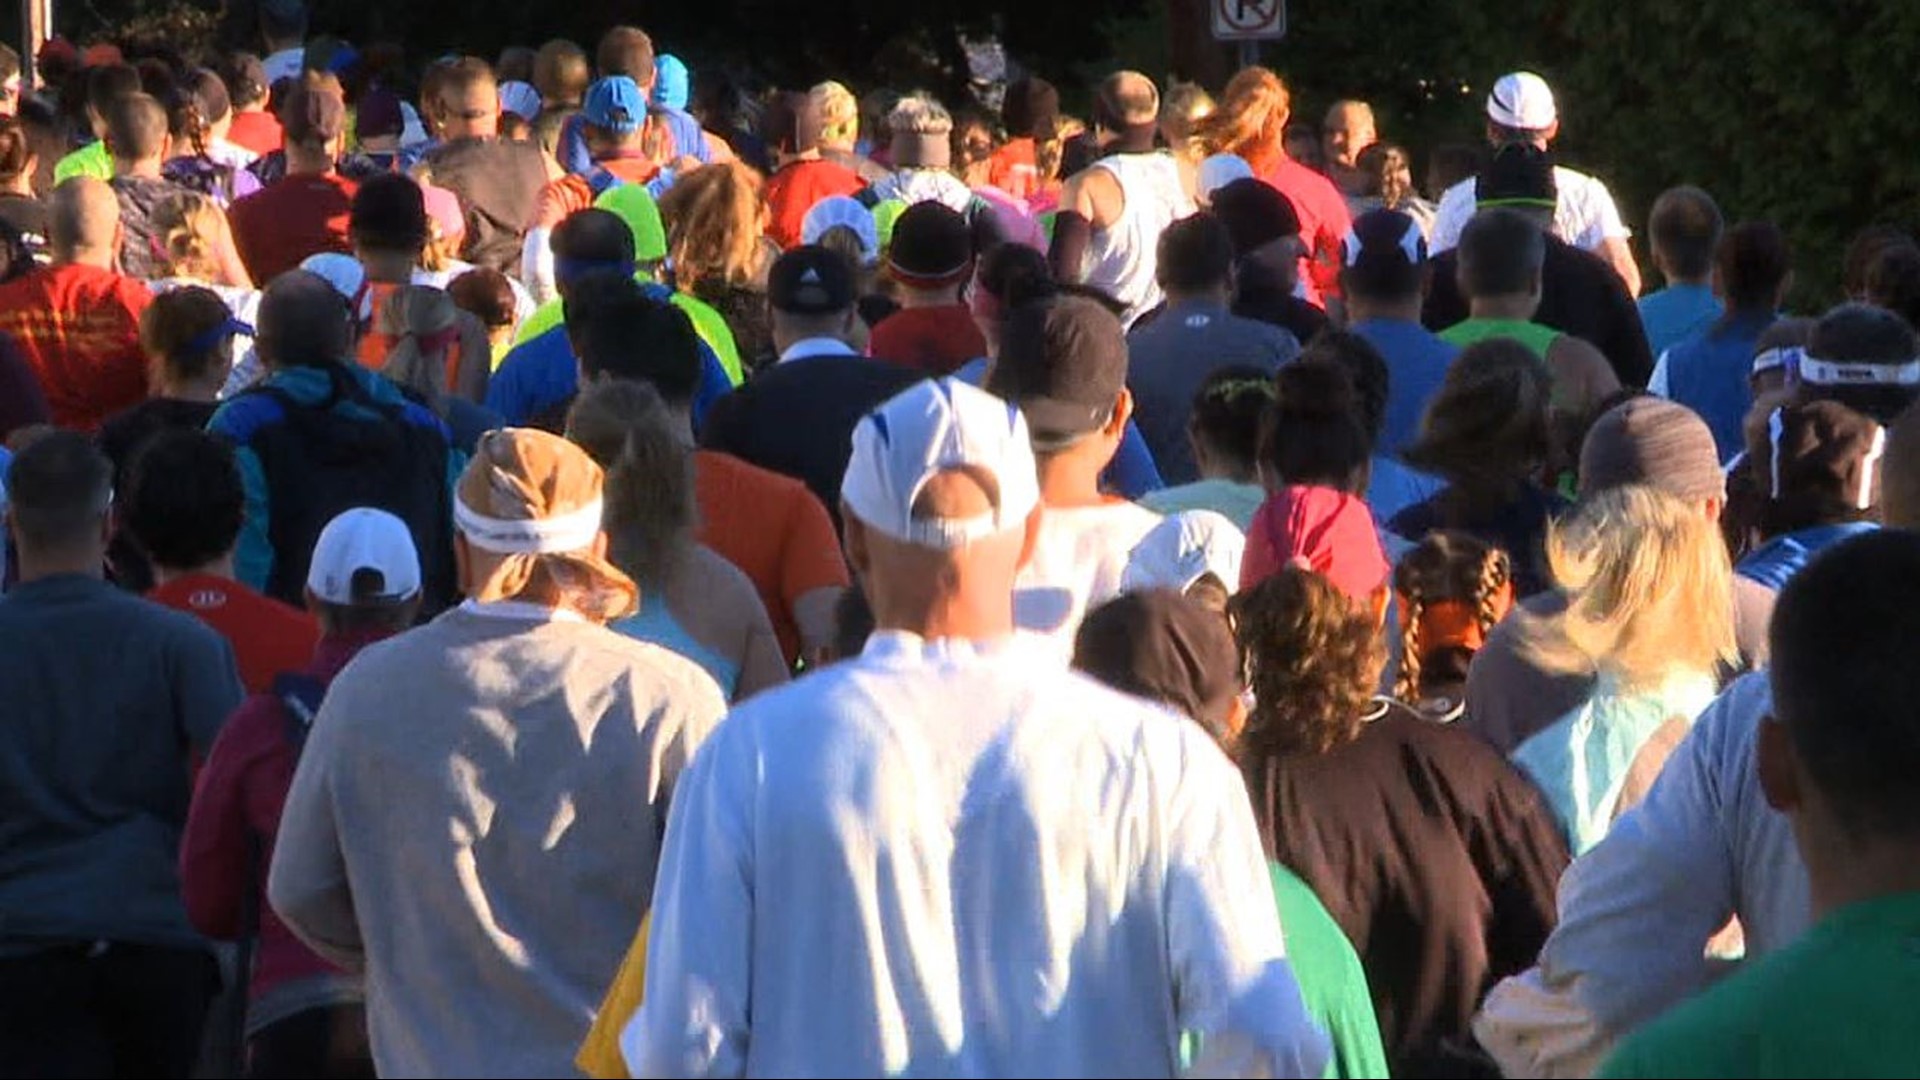 Over 1,000 runners were expected for the October event.